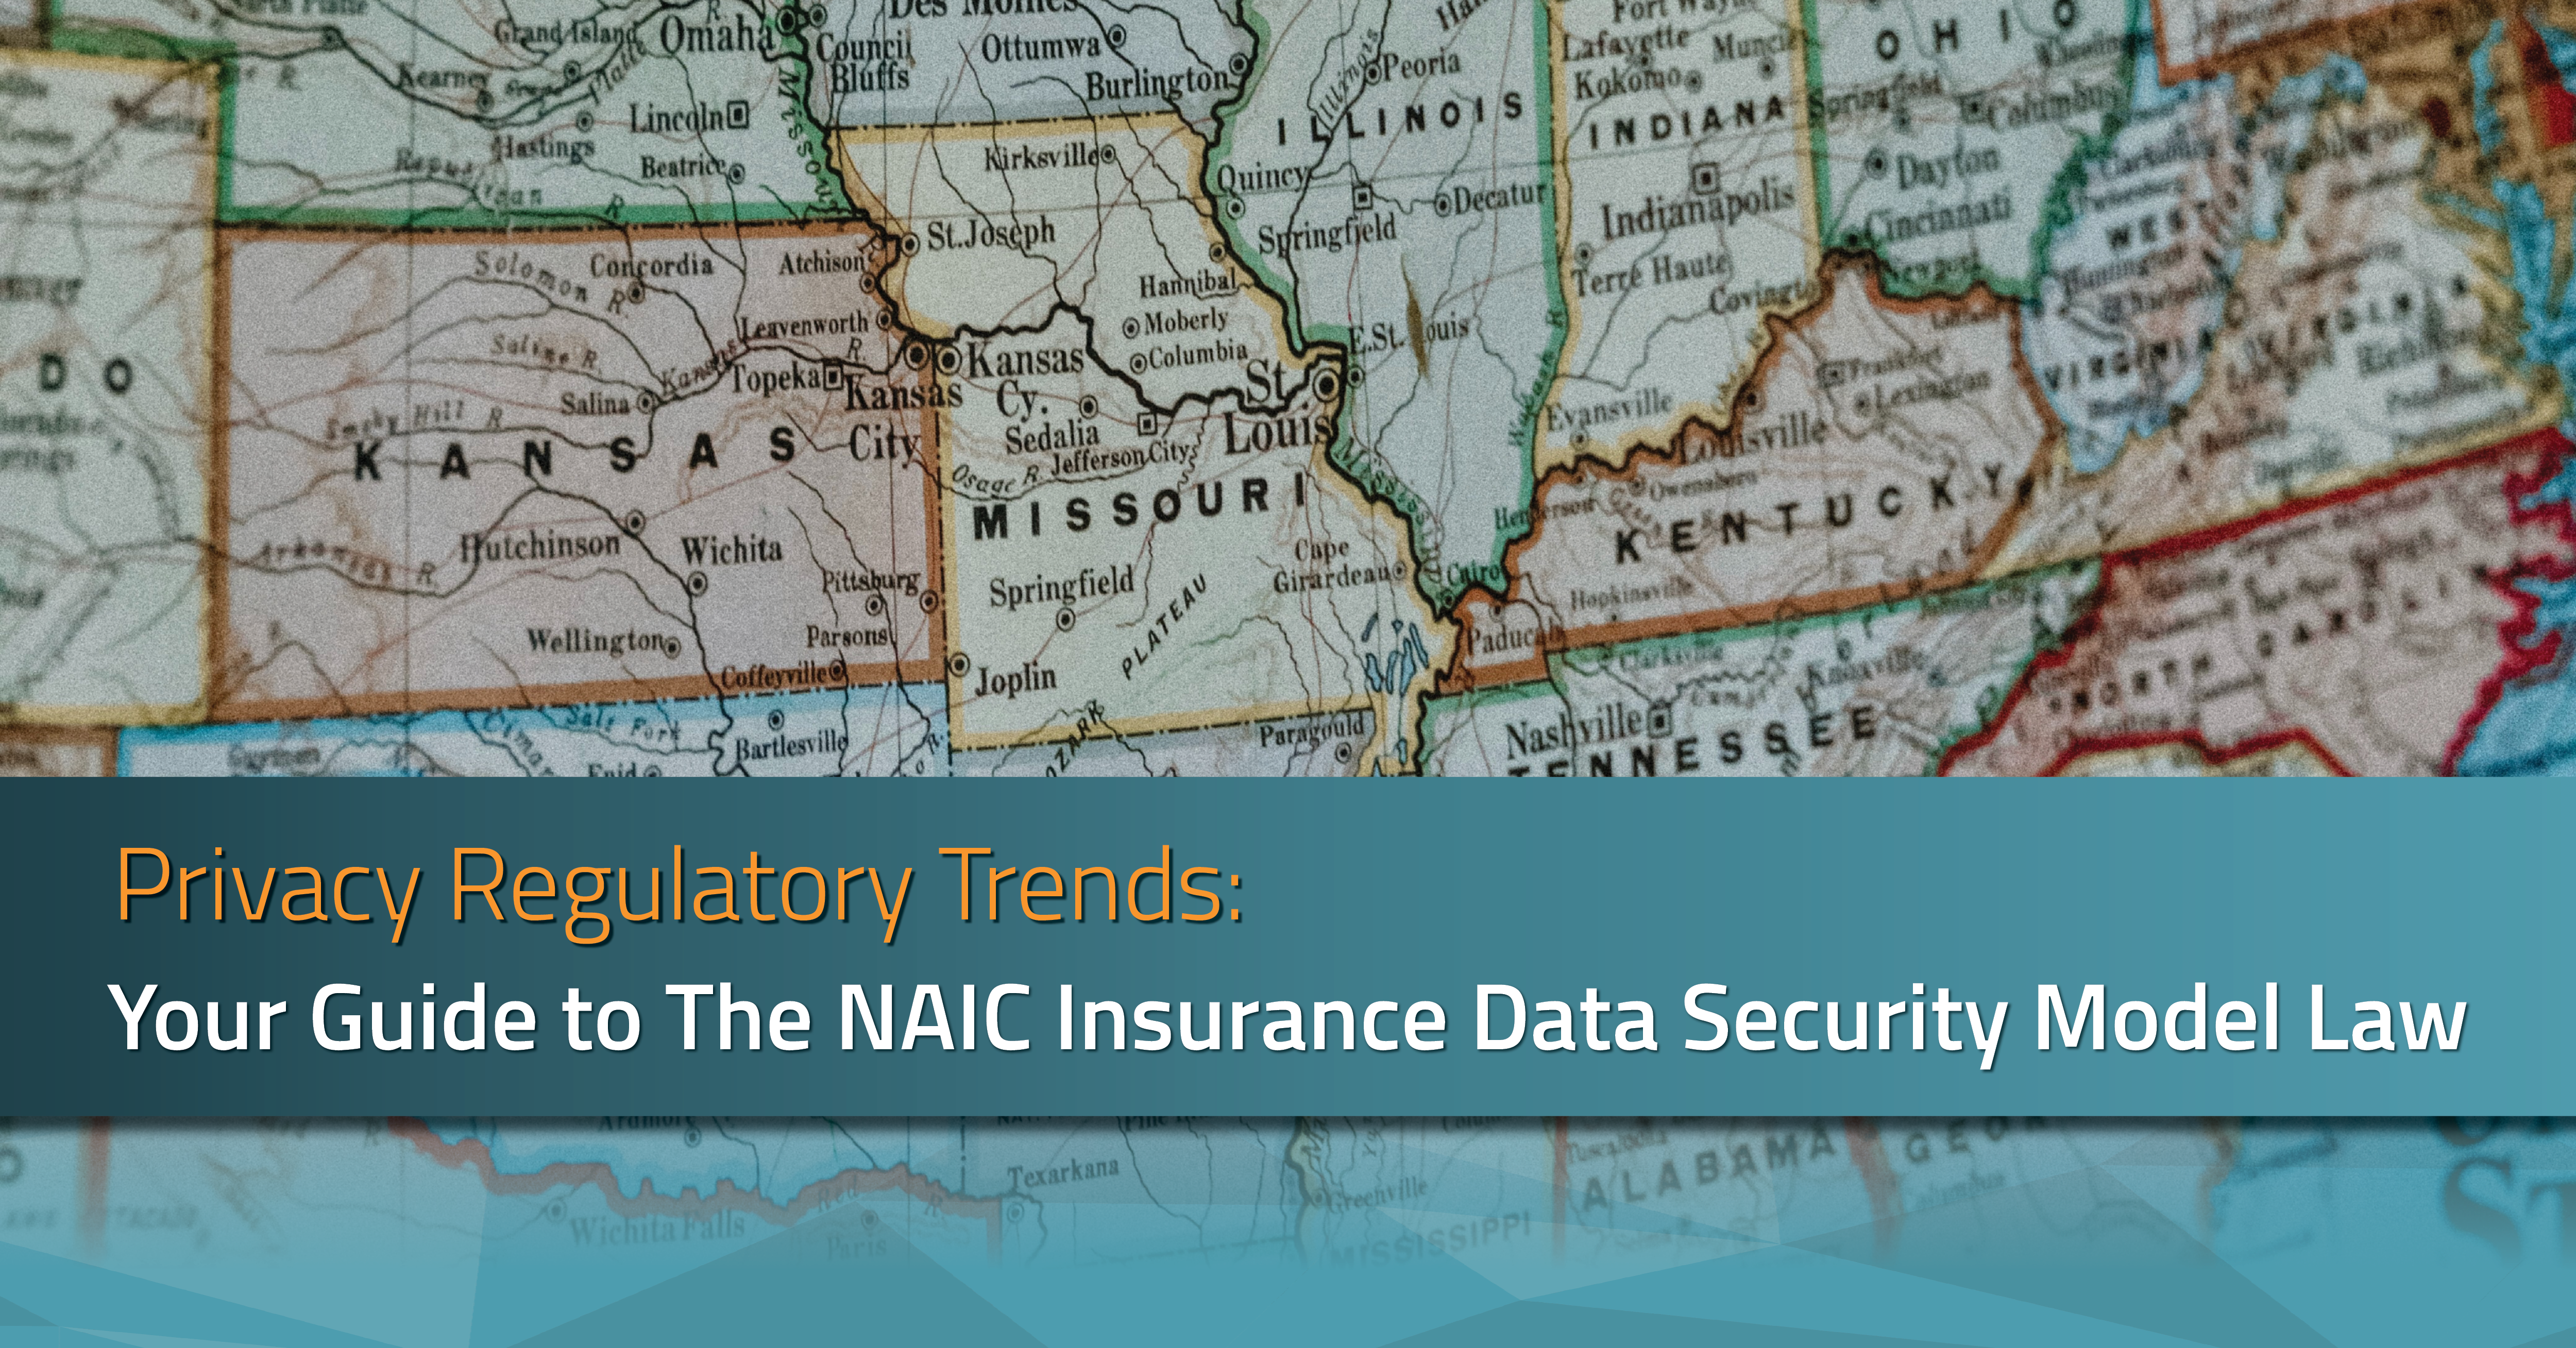 Privacy Regulatory Trends Guide to NAIC Insurance Data Security Model Law | RadarFirst